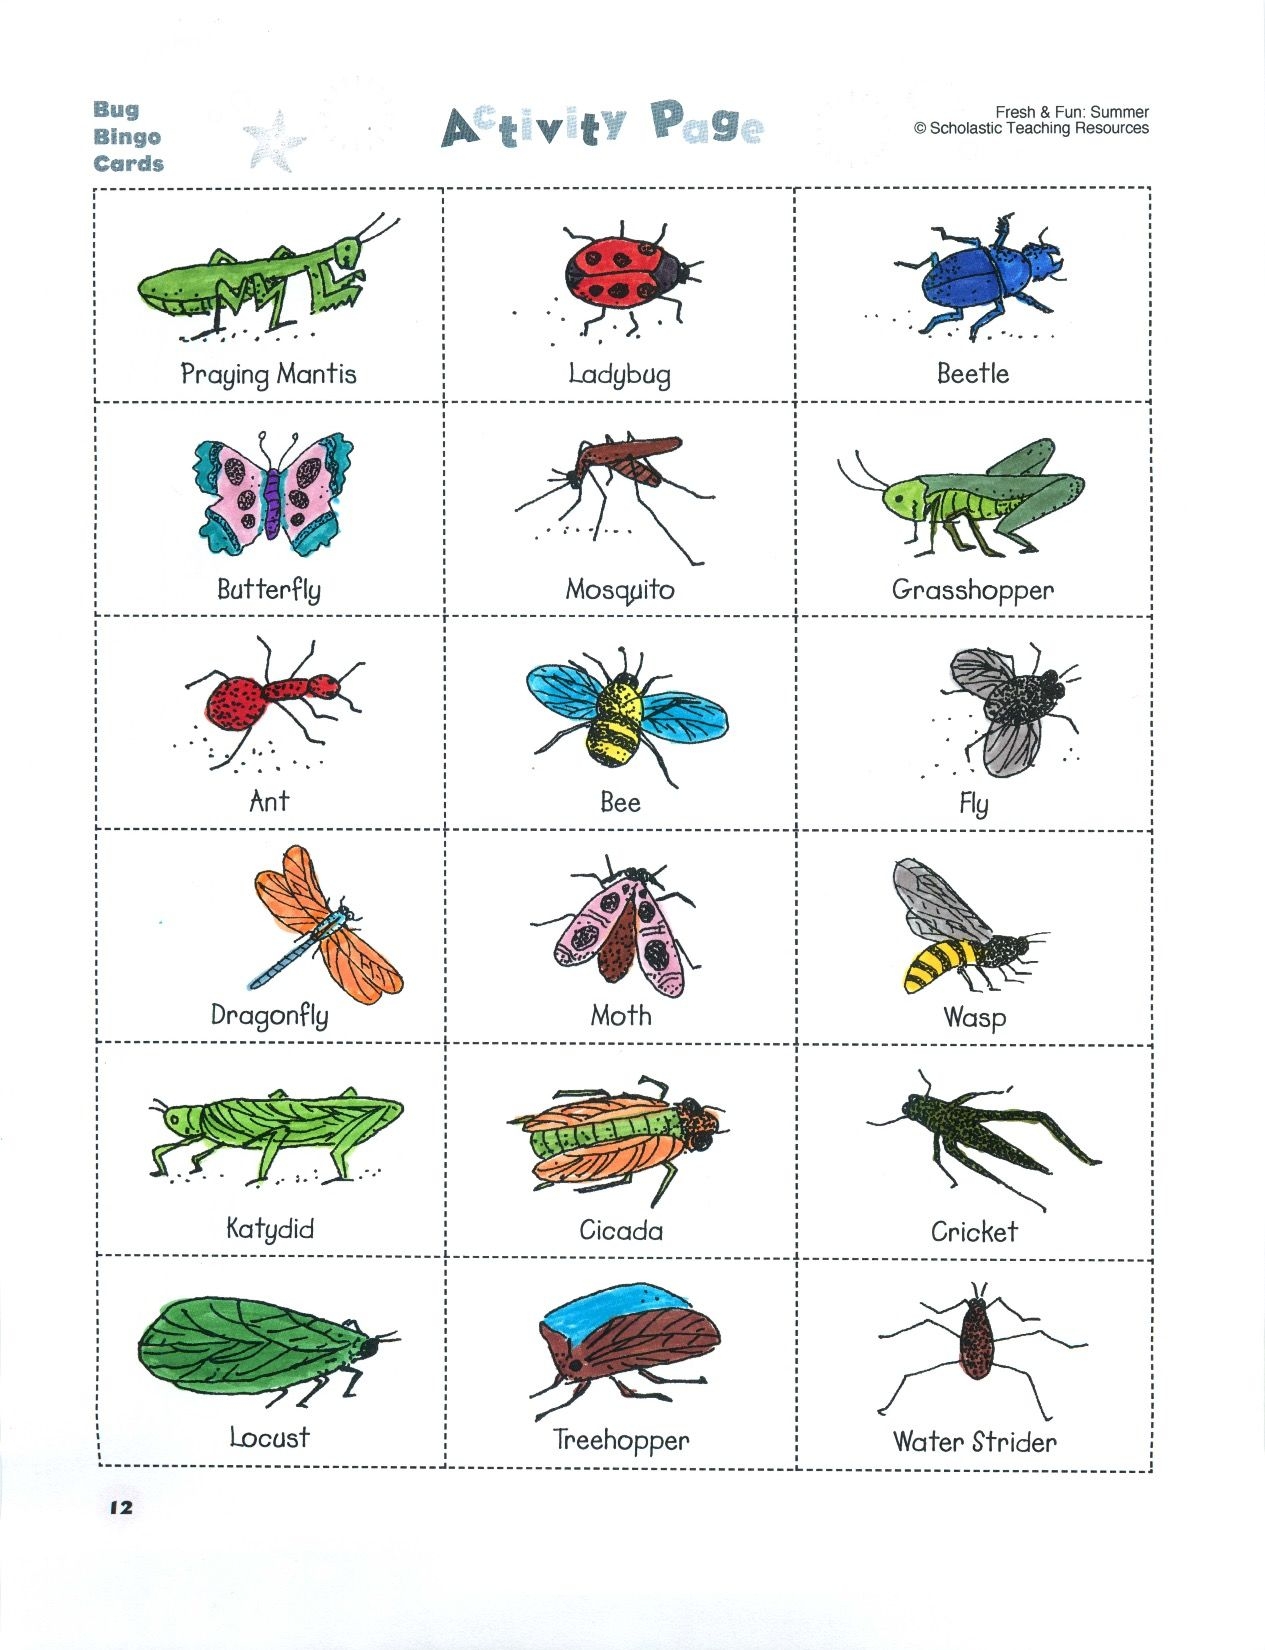 Build Science vocabulary With A Game Of Bug BINGO Explore How insects Are Alike And Different Kids Math Worksheets Bugs Preschool Fall Preschool Activities